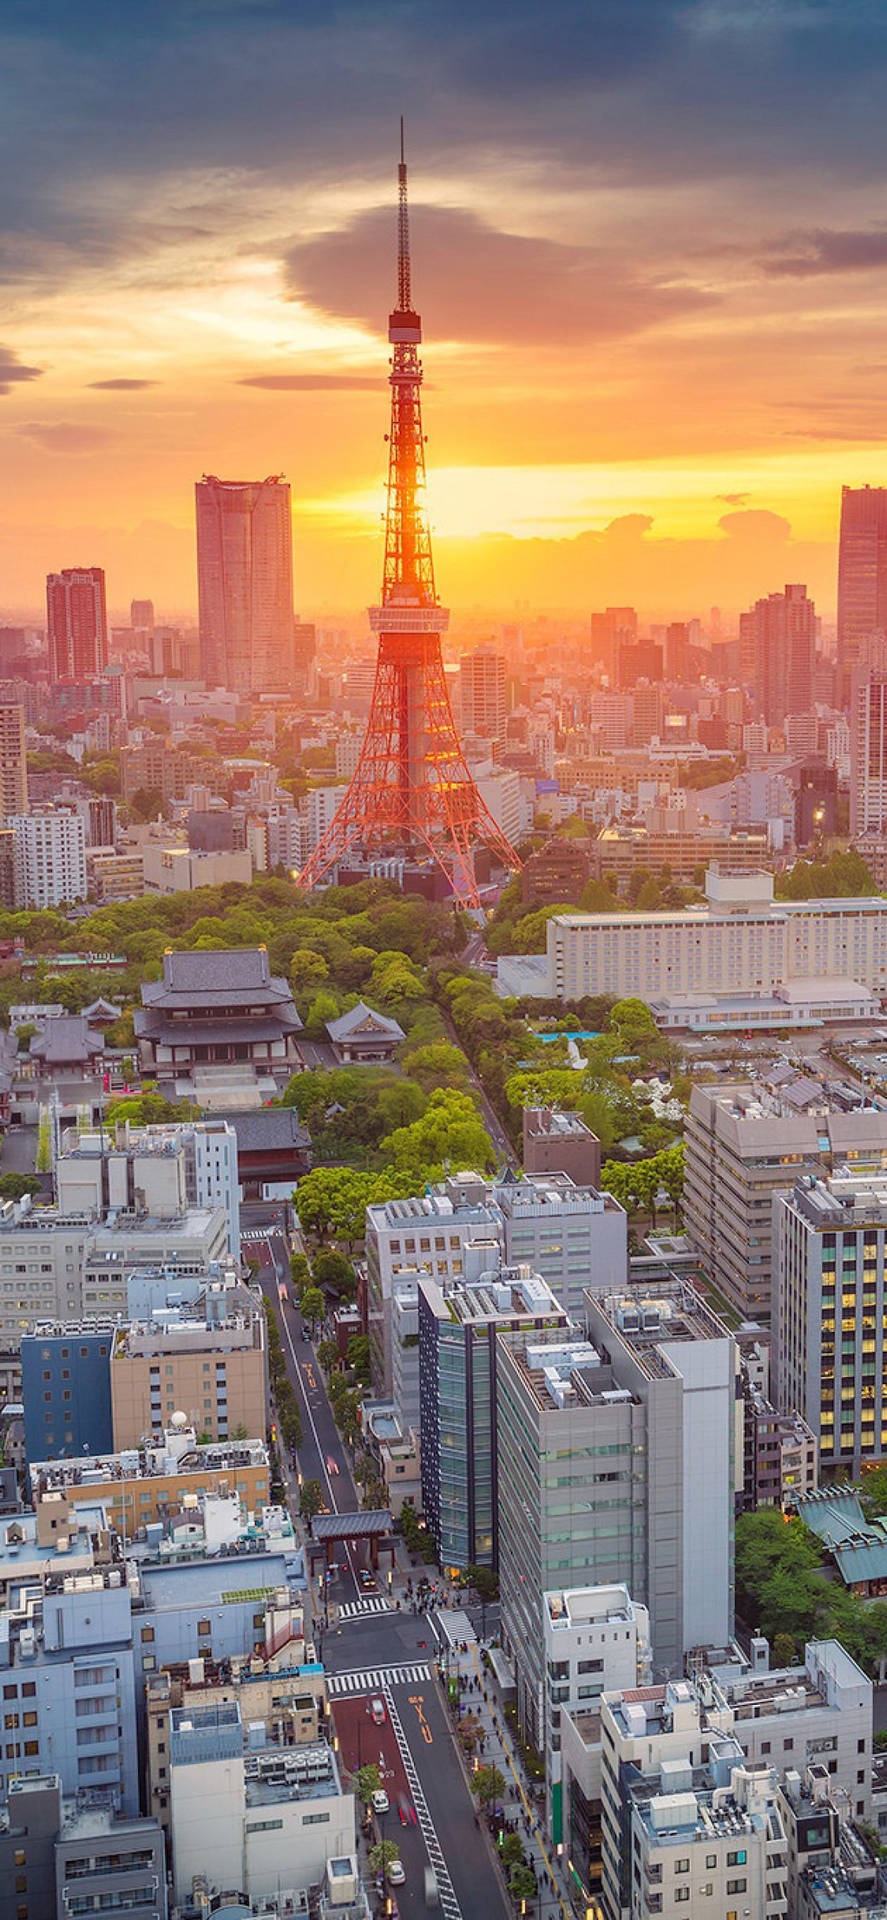 Tokyo Tower Photographed At Sunset Wallpaper